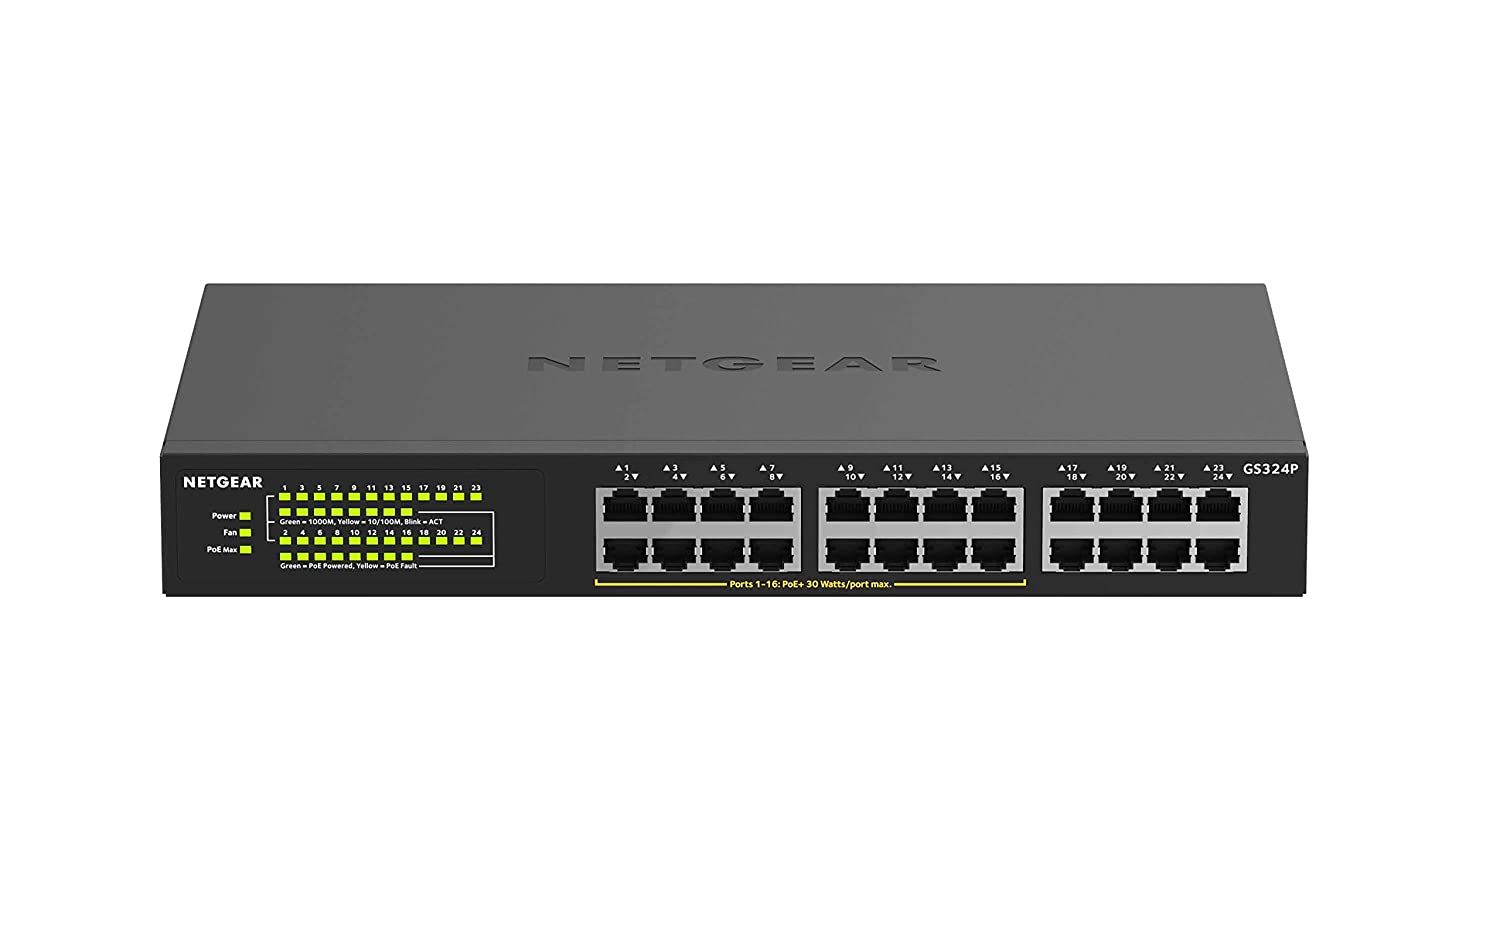 Switch picture. POE Switch p208 коммутатор. POE Switch 24 Port. Netgear POE коммутатор. Netgear gs724tp 24 Port gig POE +.